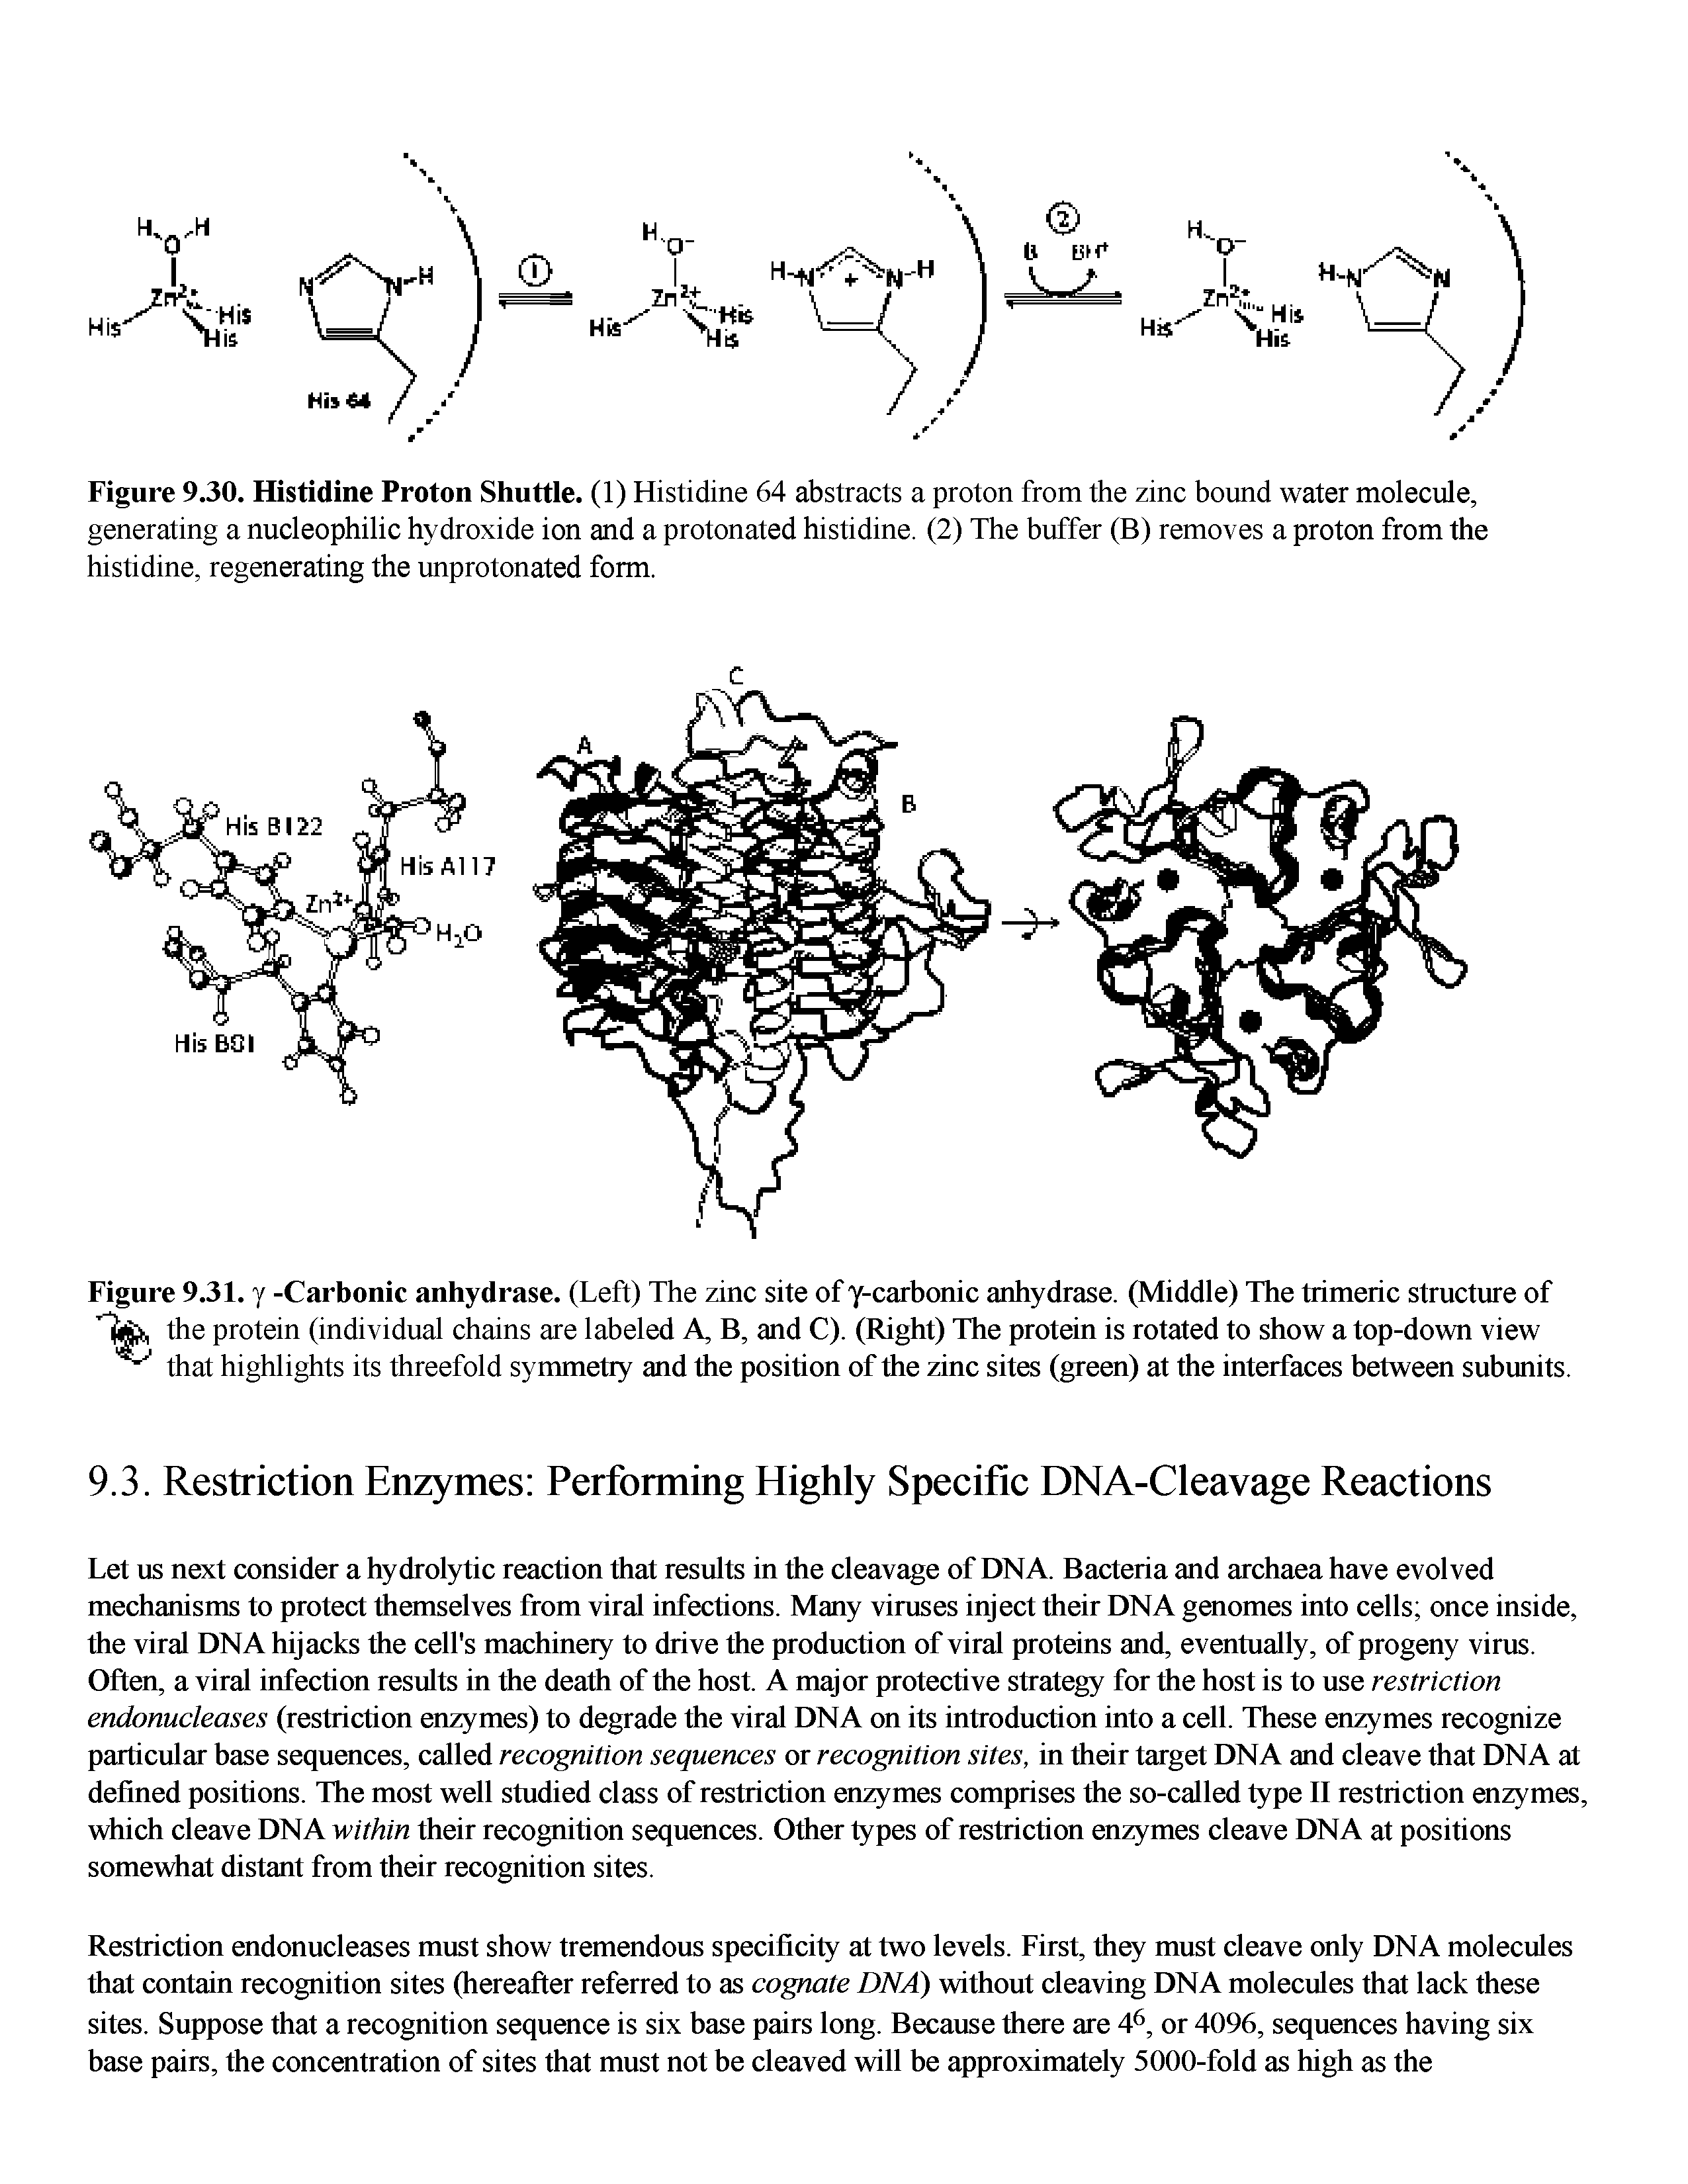 Figure 9.30. Histidine Proton Shuttle. (1) Histidine 64 abstracts a proton from the zinc bound water molecule, generating a nucleophilic hydroxide ion and a protonated histidine. (2) The buffer (B) removes a proton from the histidine, regenerating the unprotonated form.